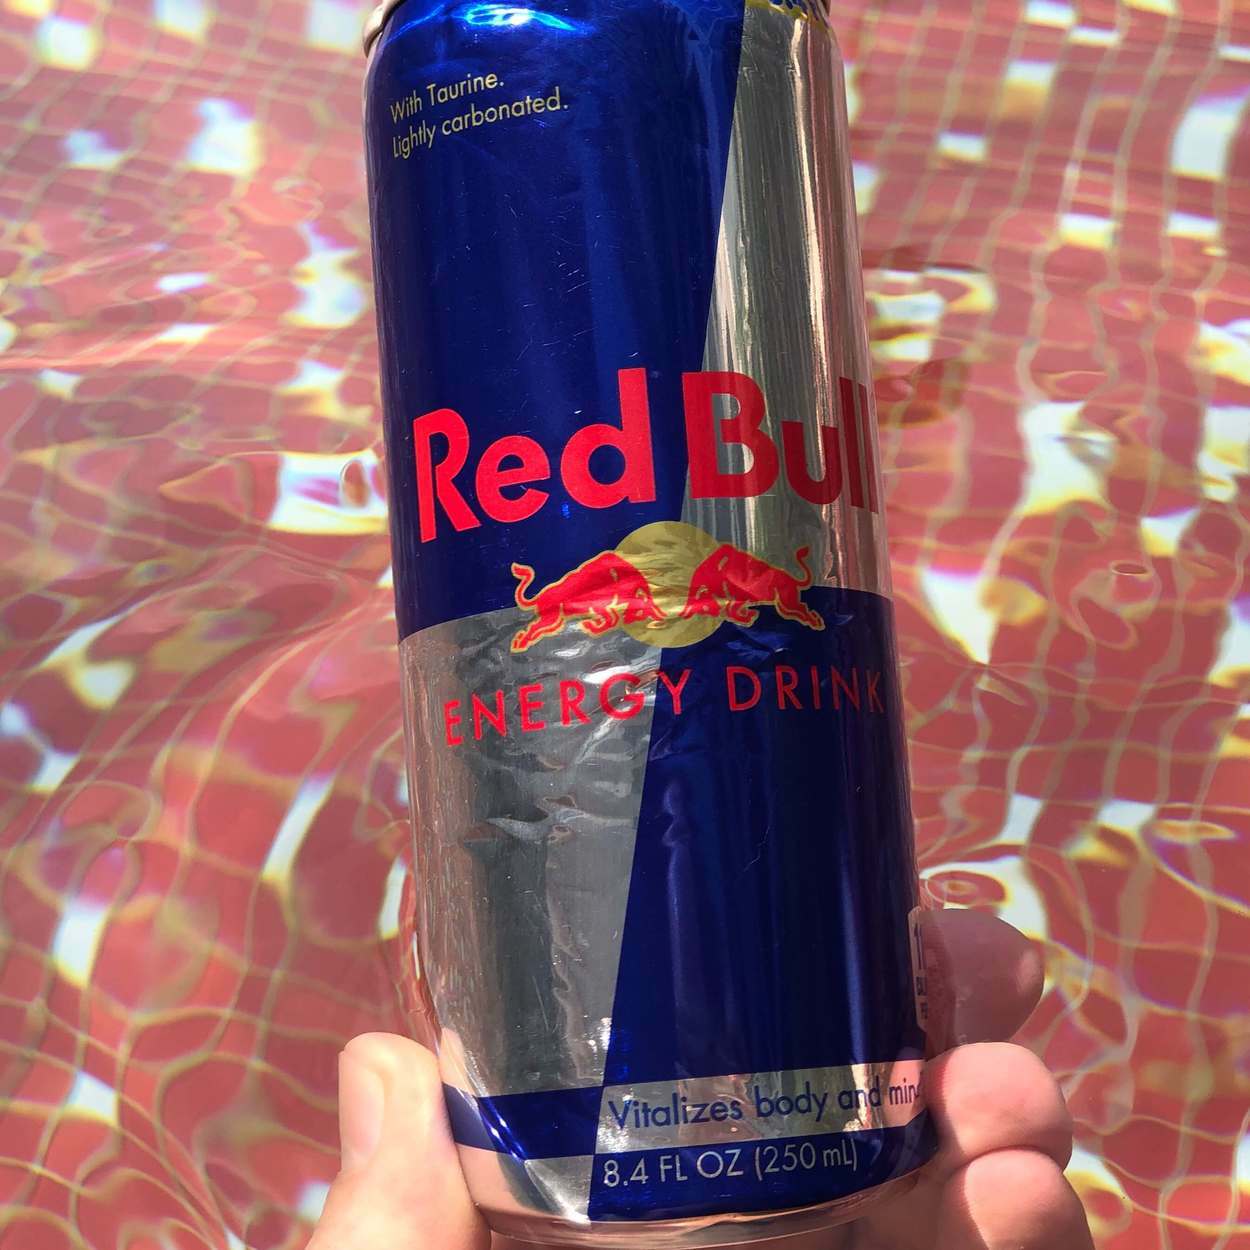 Red bull gives you wings, but does it give you a gassy stomach as well?
